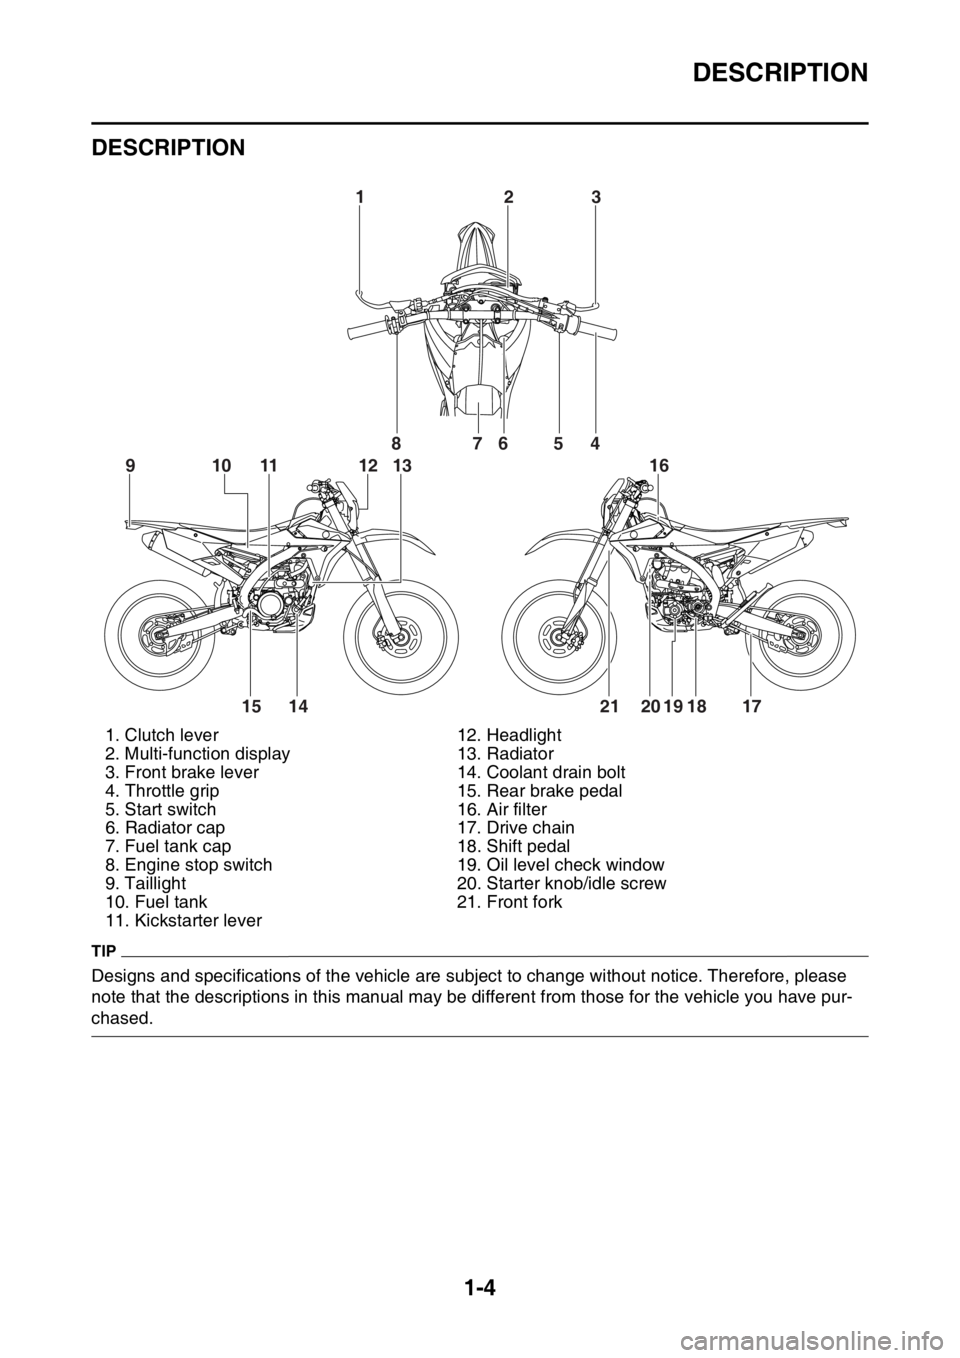 YAMAHA WR 250F 2017  Owners Manual DESCRIPTION
1-4
EAS2GBB009
DESCRIPTION
TIP
Designs and specifications of the vehicle are subject to change without notice. Therefore, please 
note that the descriptions in this manual may be different